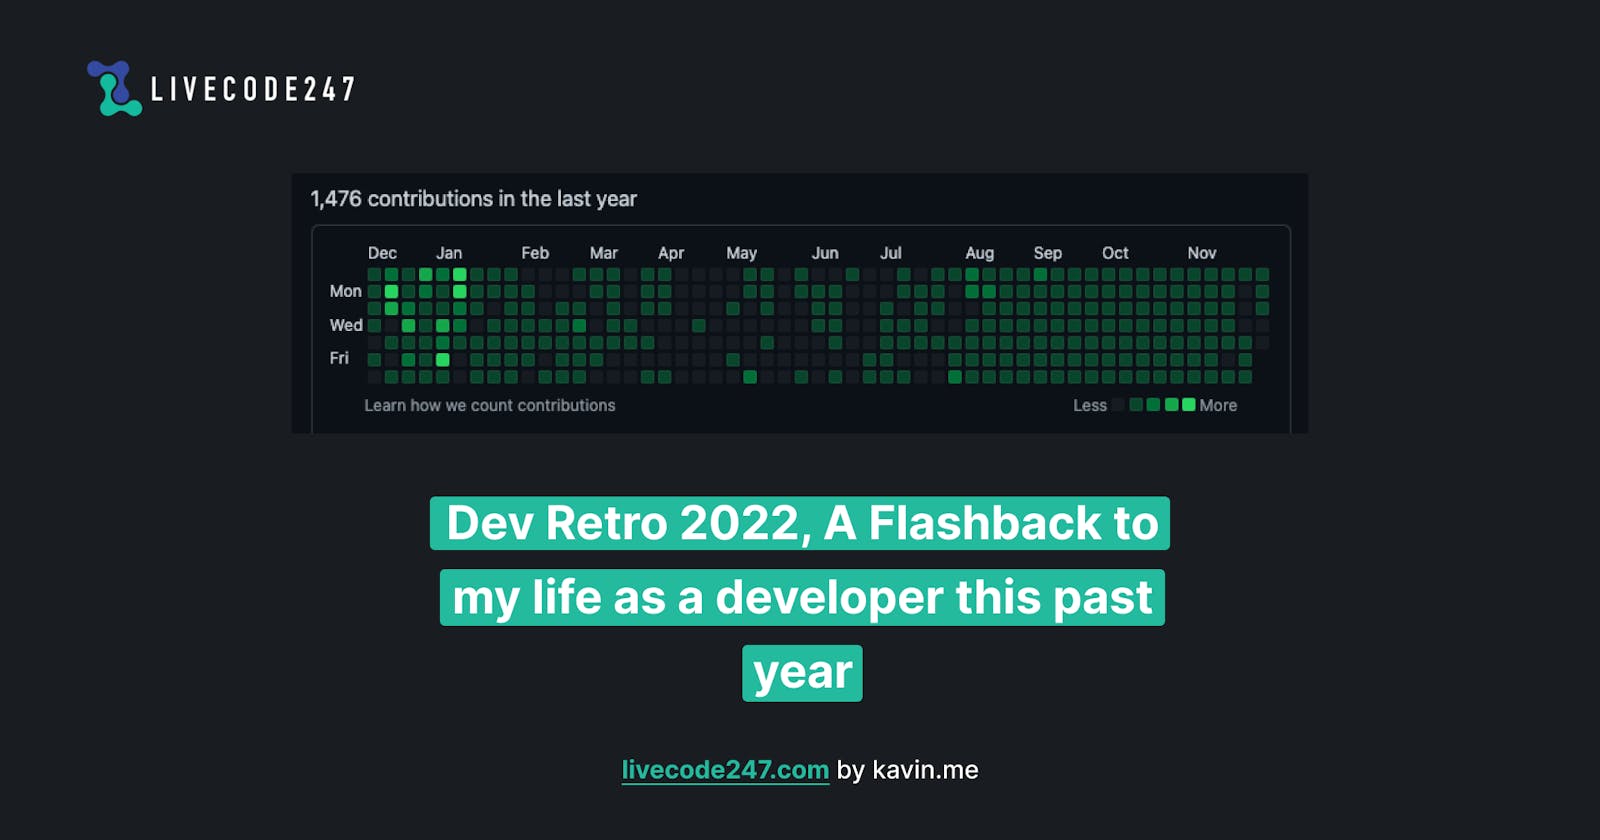 Dev Retro 2022, A Flashback to my life as a developer this past year